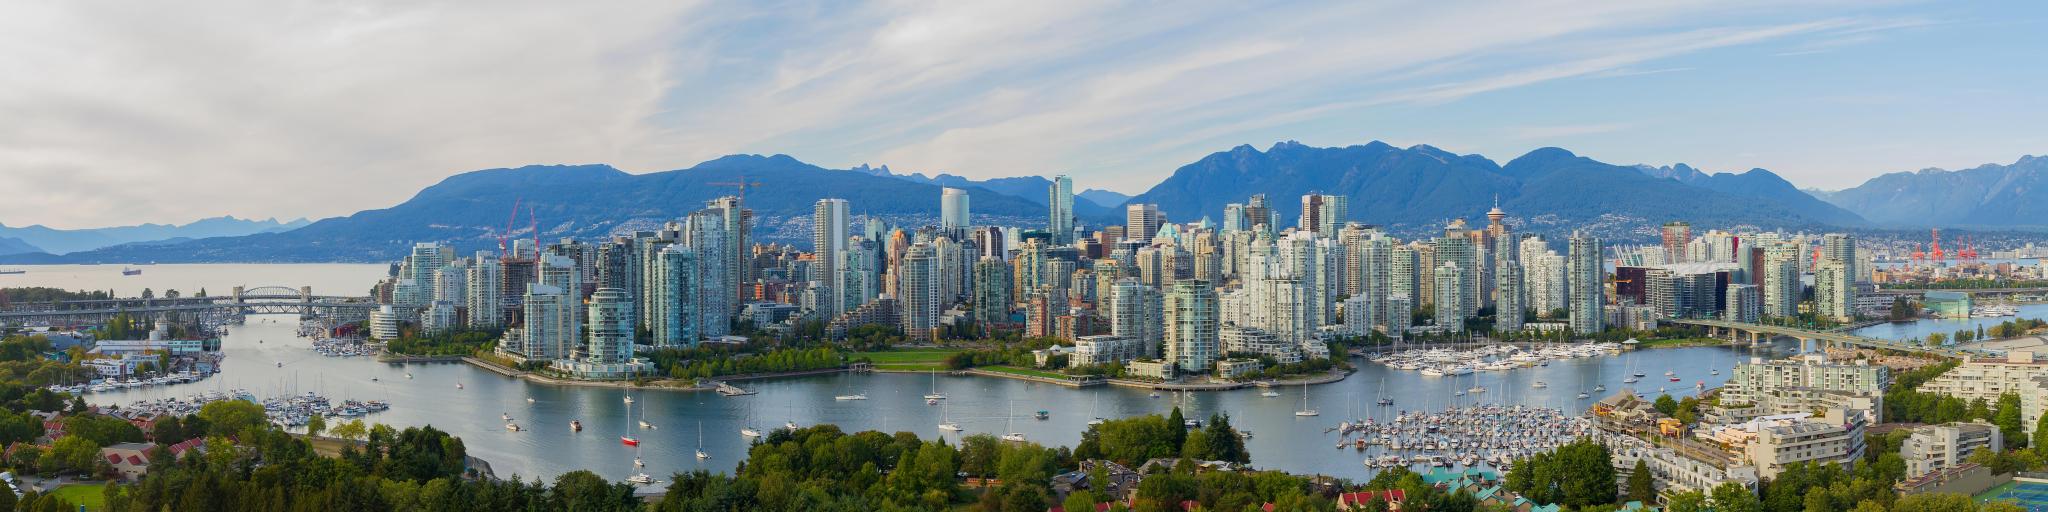 Vancouver, Canada with a panorama view taken from False Creek and the stunning mountains in the distance.